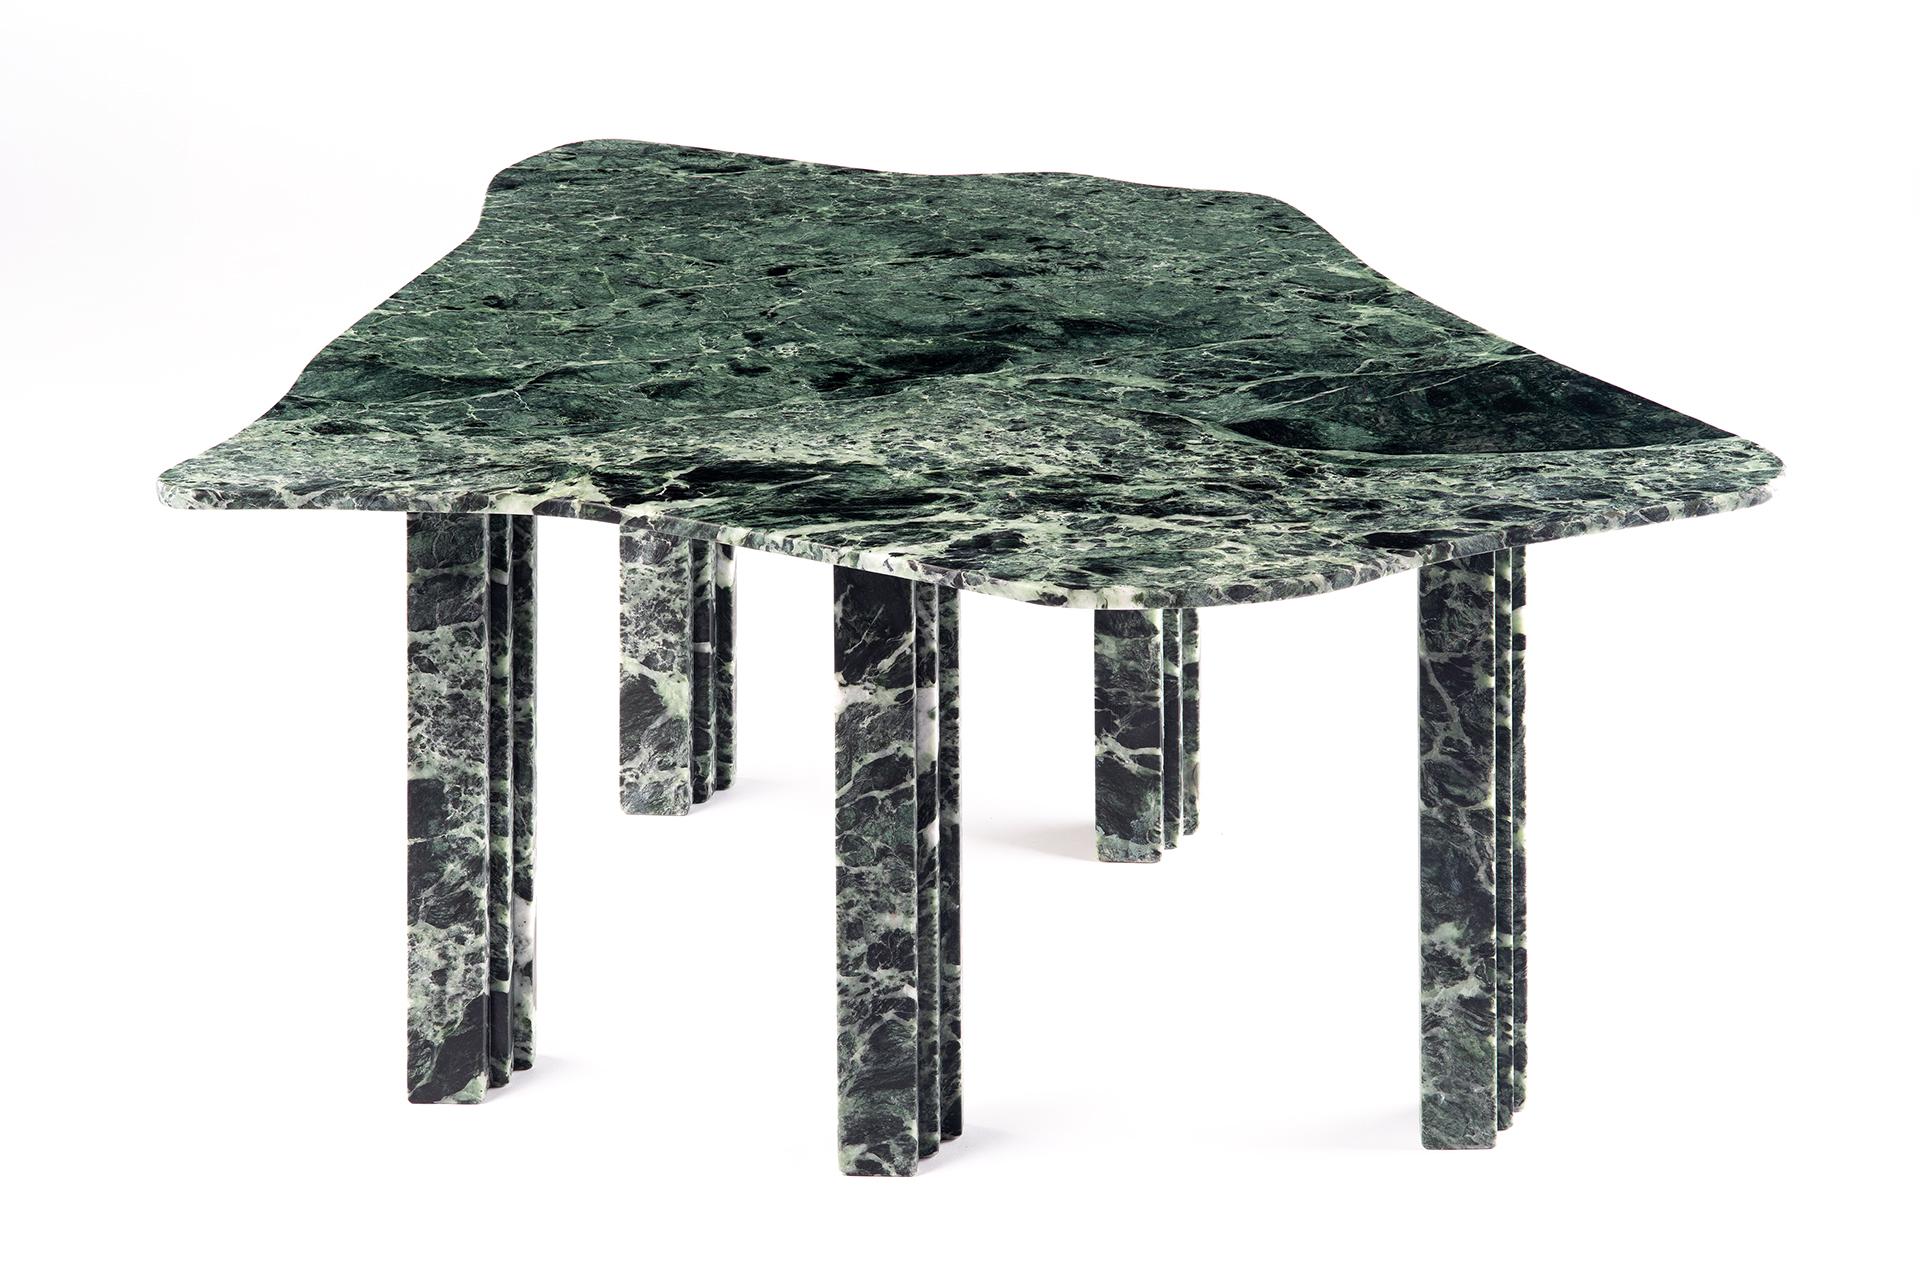 Sculptural green marble table - Lorenzo Bini
Title: No-thin
Measures: 180 x 150 x H 73.5 cm
Material: Verde Alpi

Also available as a Coffee table 90 x 75 x H 37 cm
Please contact us.


Six Tableaux is a series of marble tables designed by Lorenzo